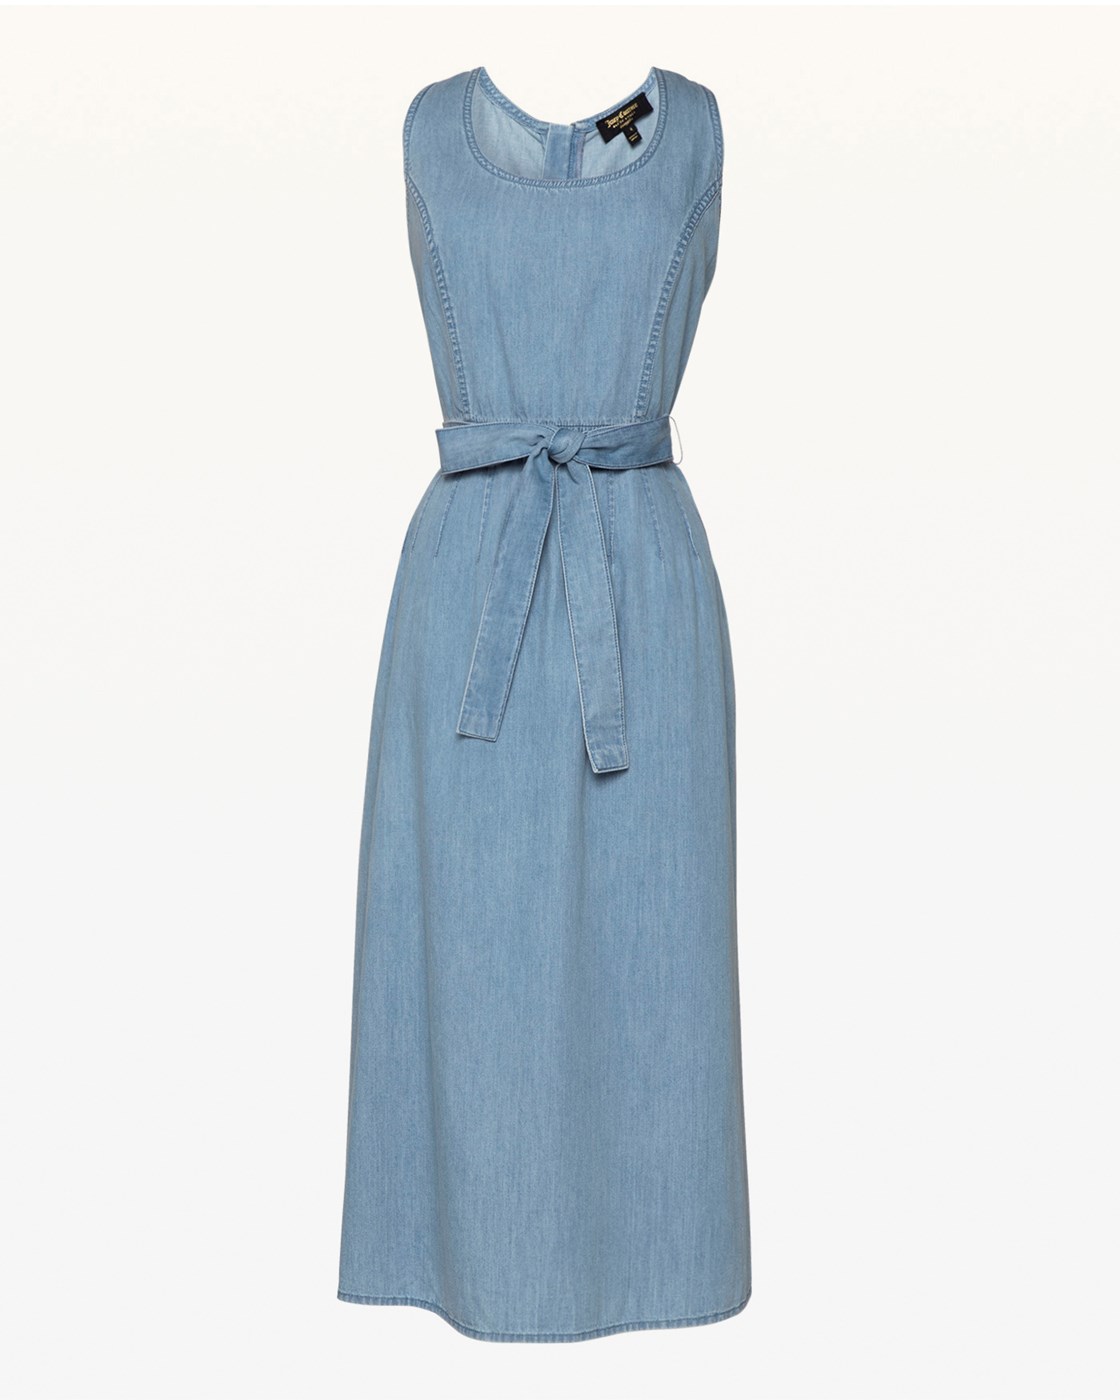 Juicy Couture Cotton Chambray Dress